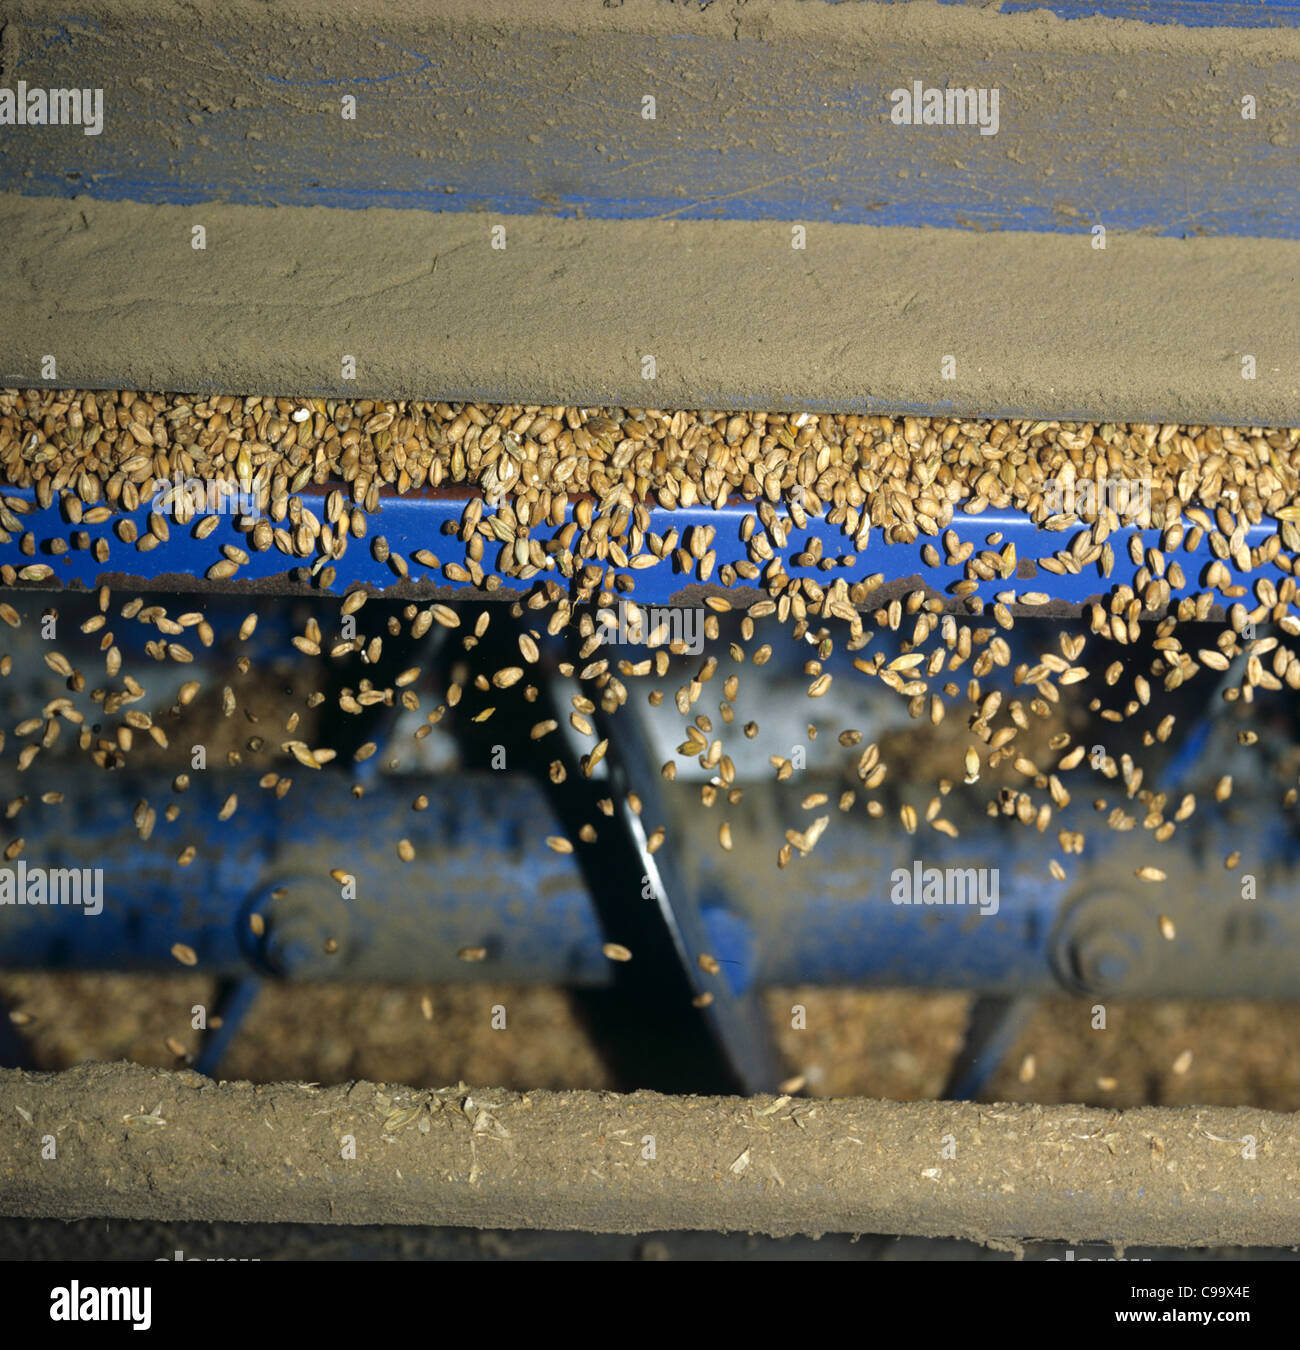 Wheat seed discharging from a grain drier after harvet Stock Photo